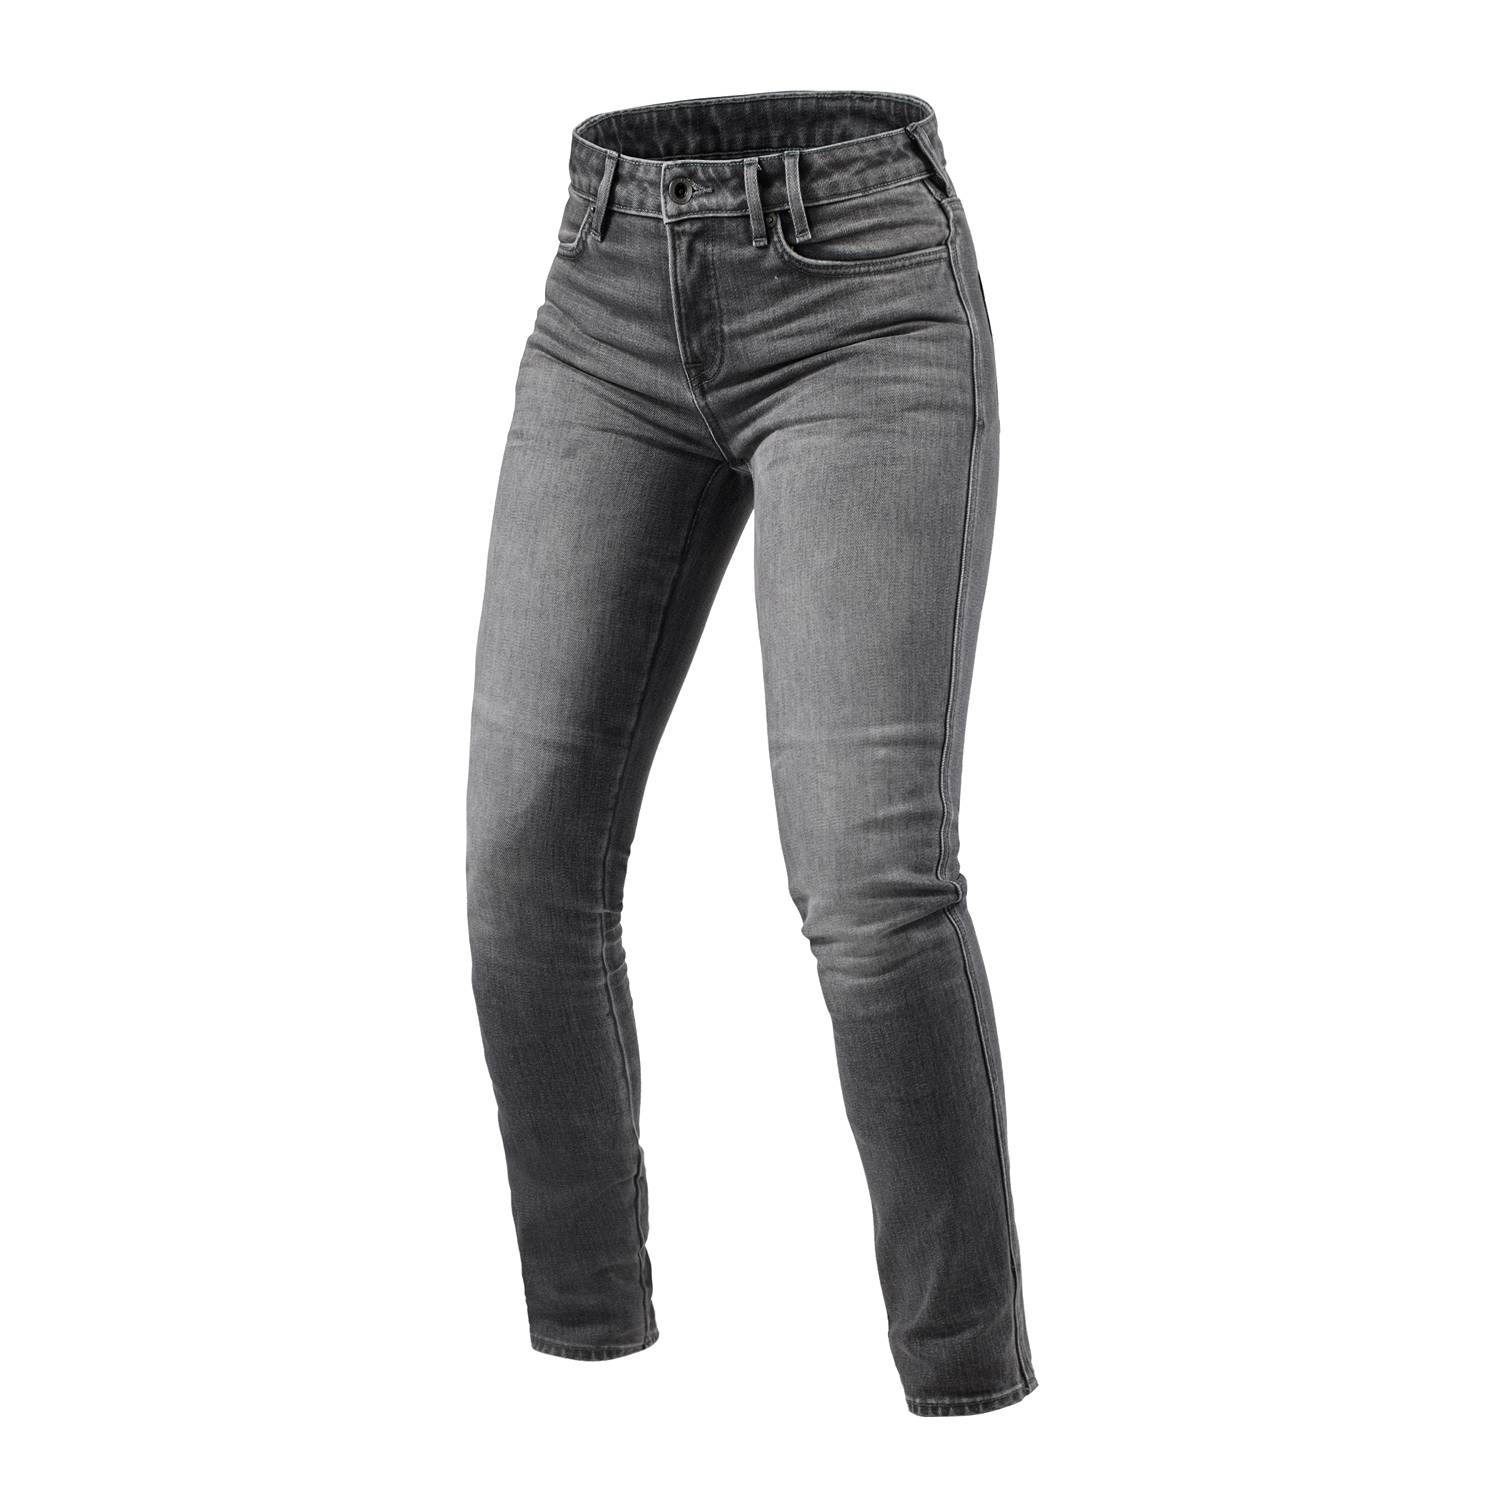 Image of EU REV'IT! Jeans Shelby 2 Ladies SK Medium Grey Stone L32 Taille L32/W24